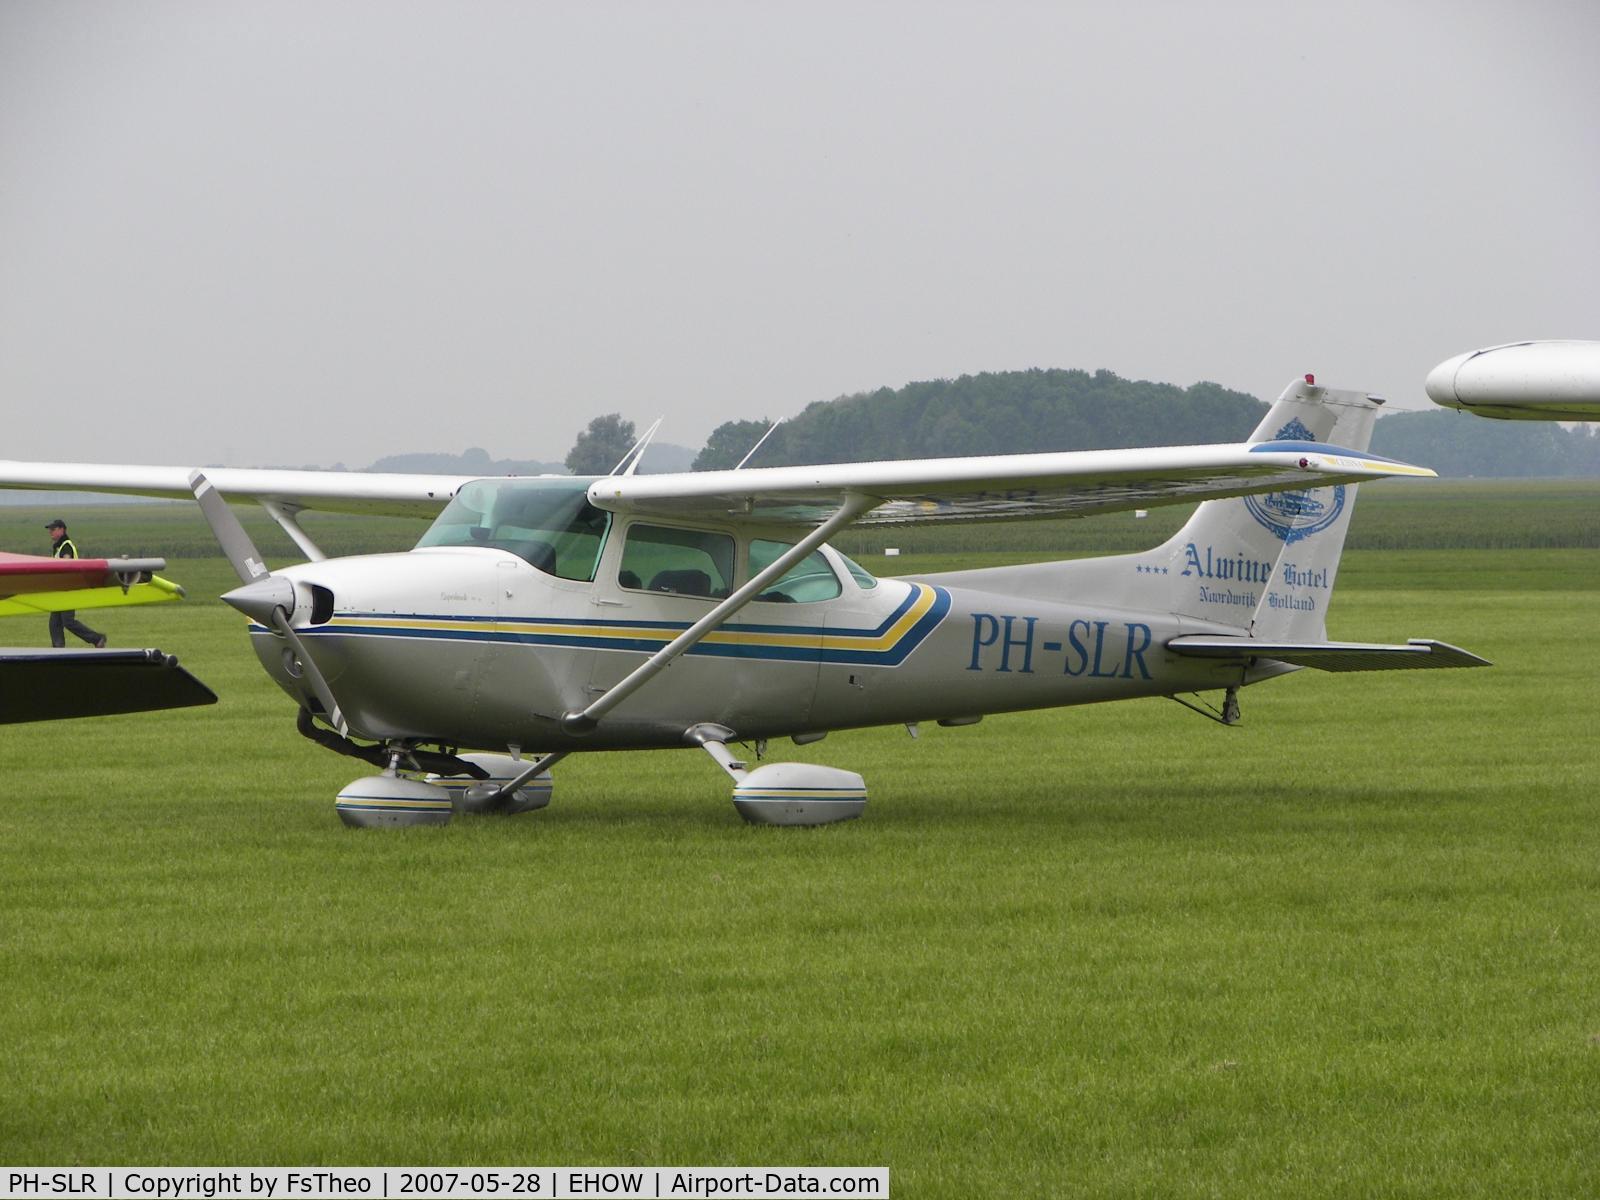 PH-SLR, Cessna 172N C/N 17271965, On display at Oostwold Airshow 2007, The Netherlands